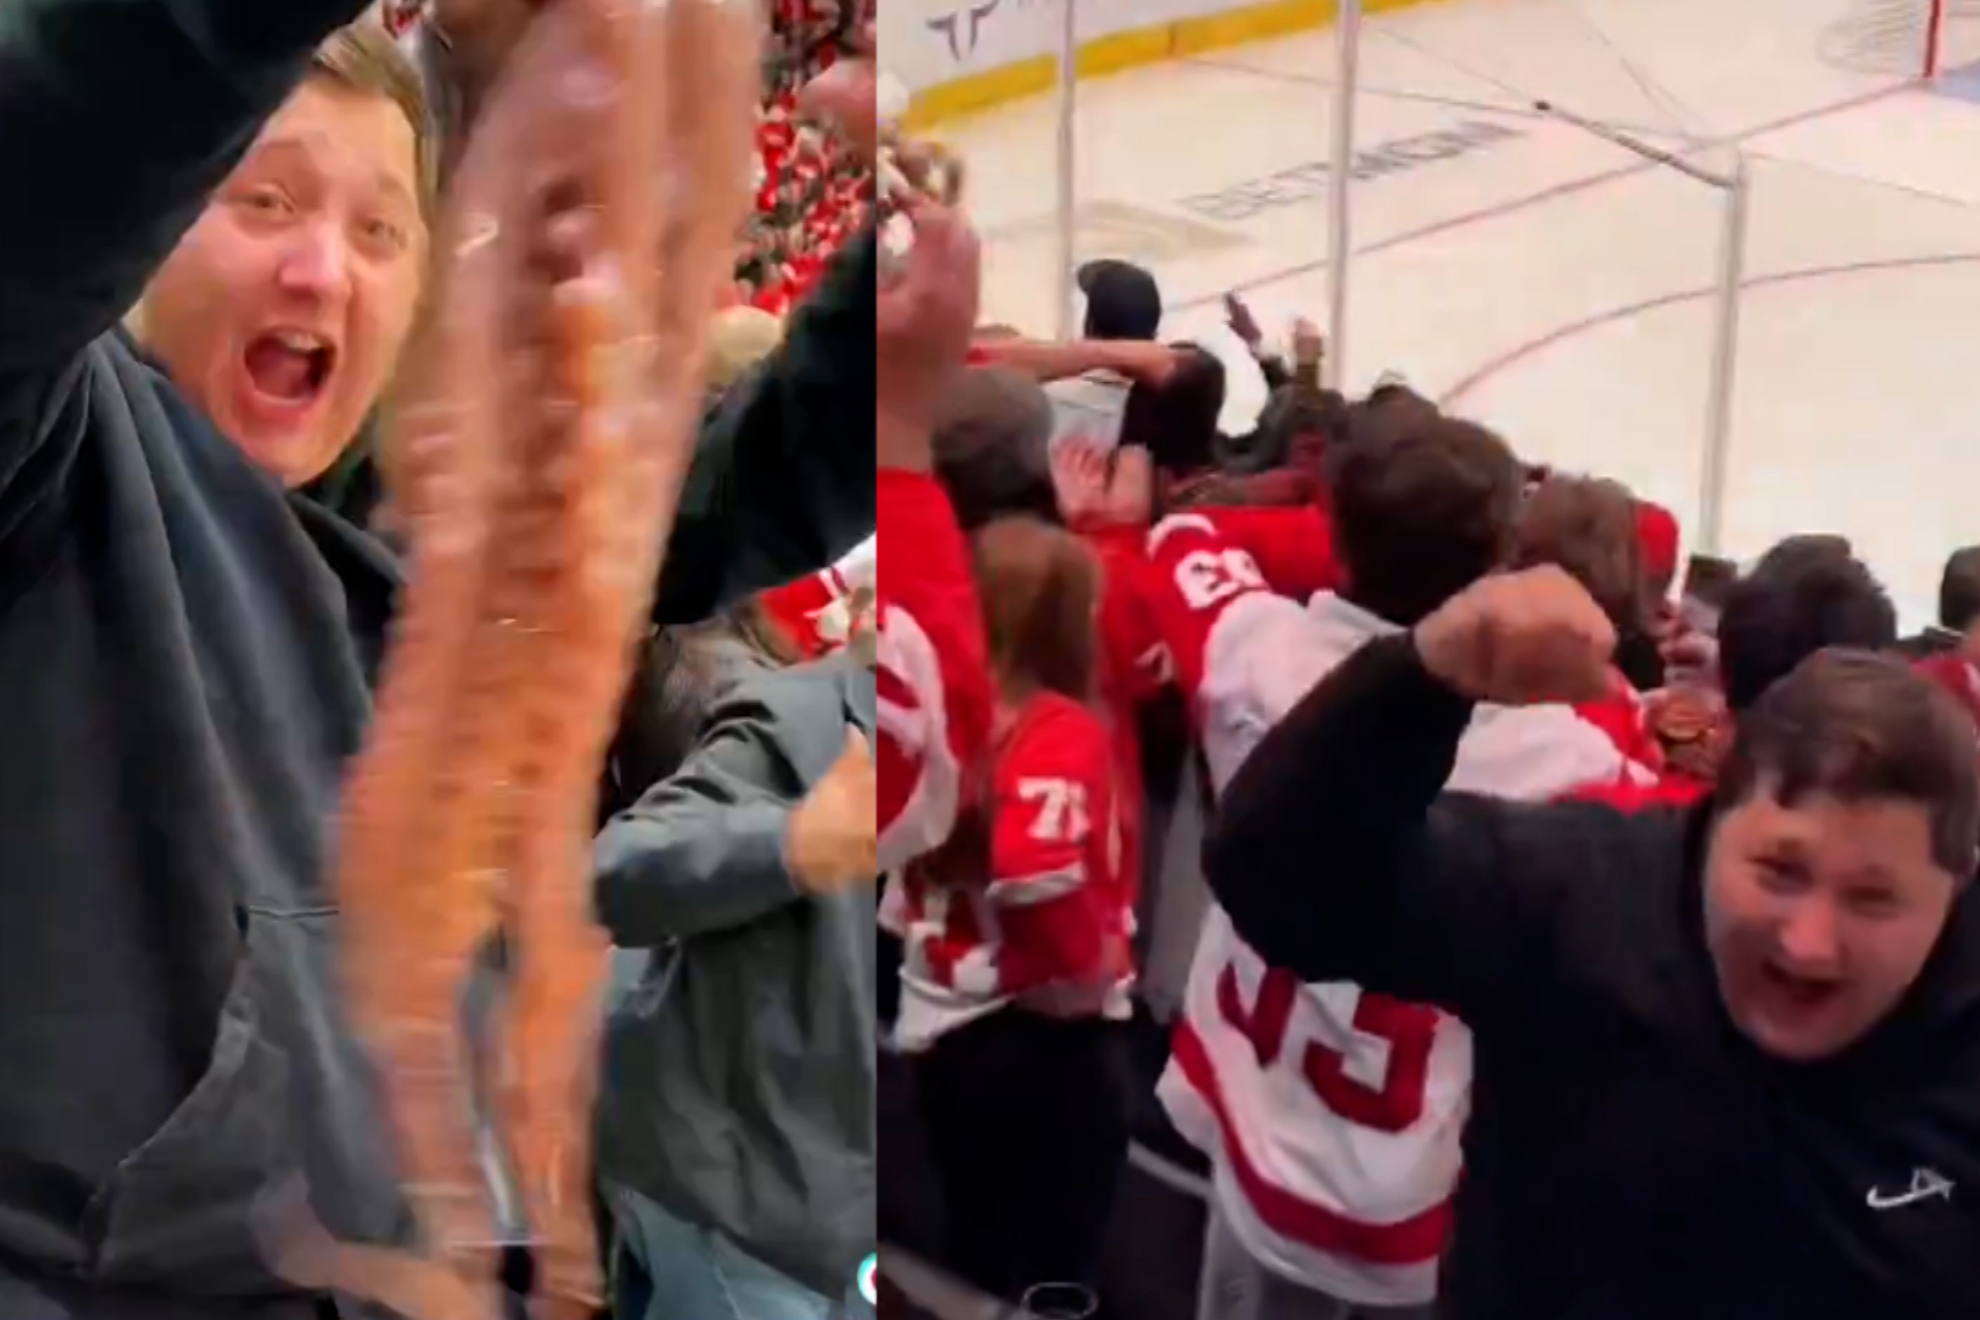 Red Wings fans threw 35 octopuses on ice in Joe Louis Arena farewell